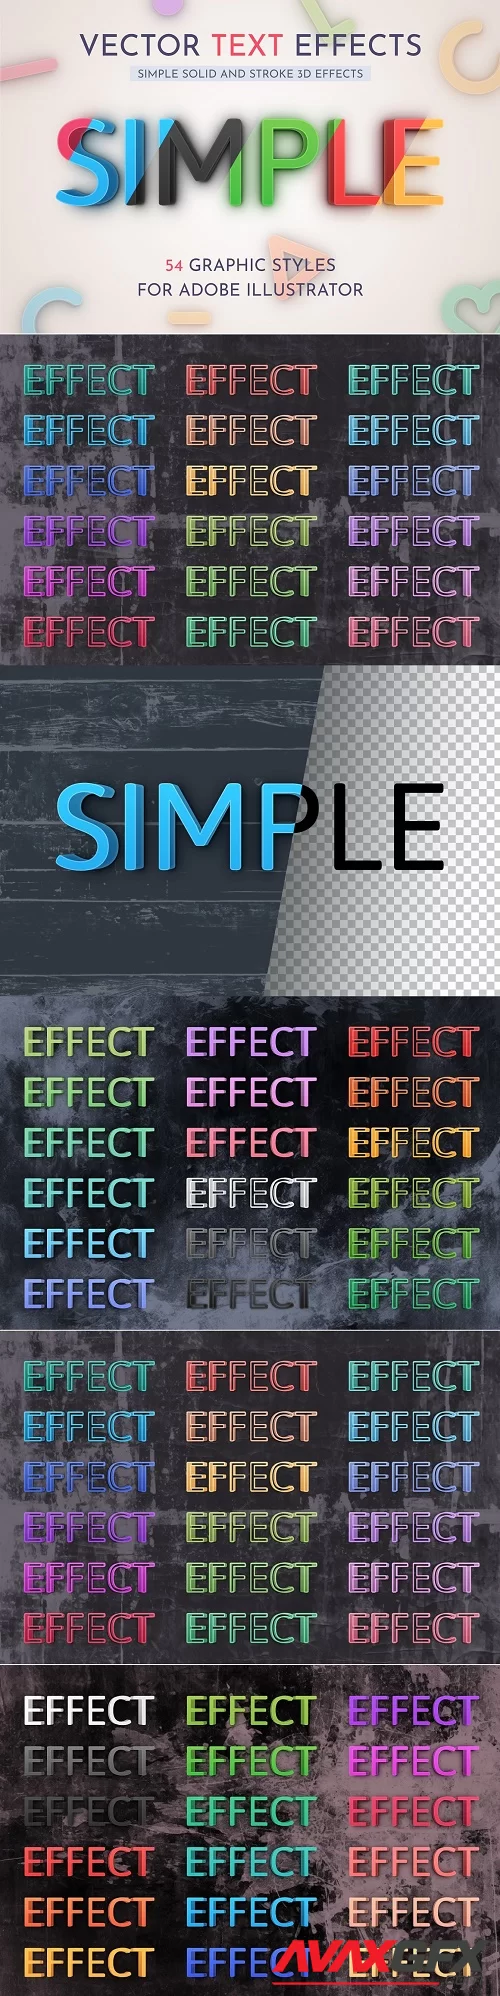 54 Simple Vector Text Effects - 21000125